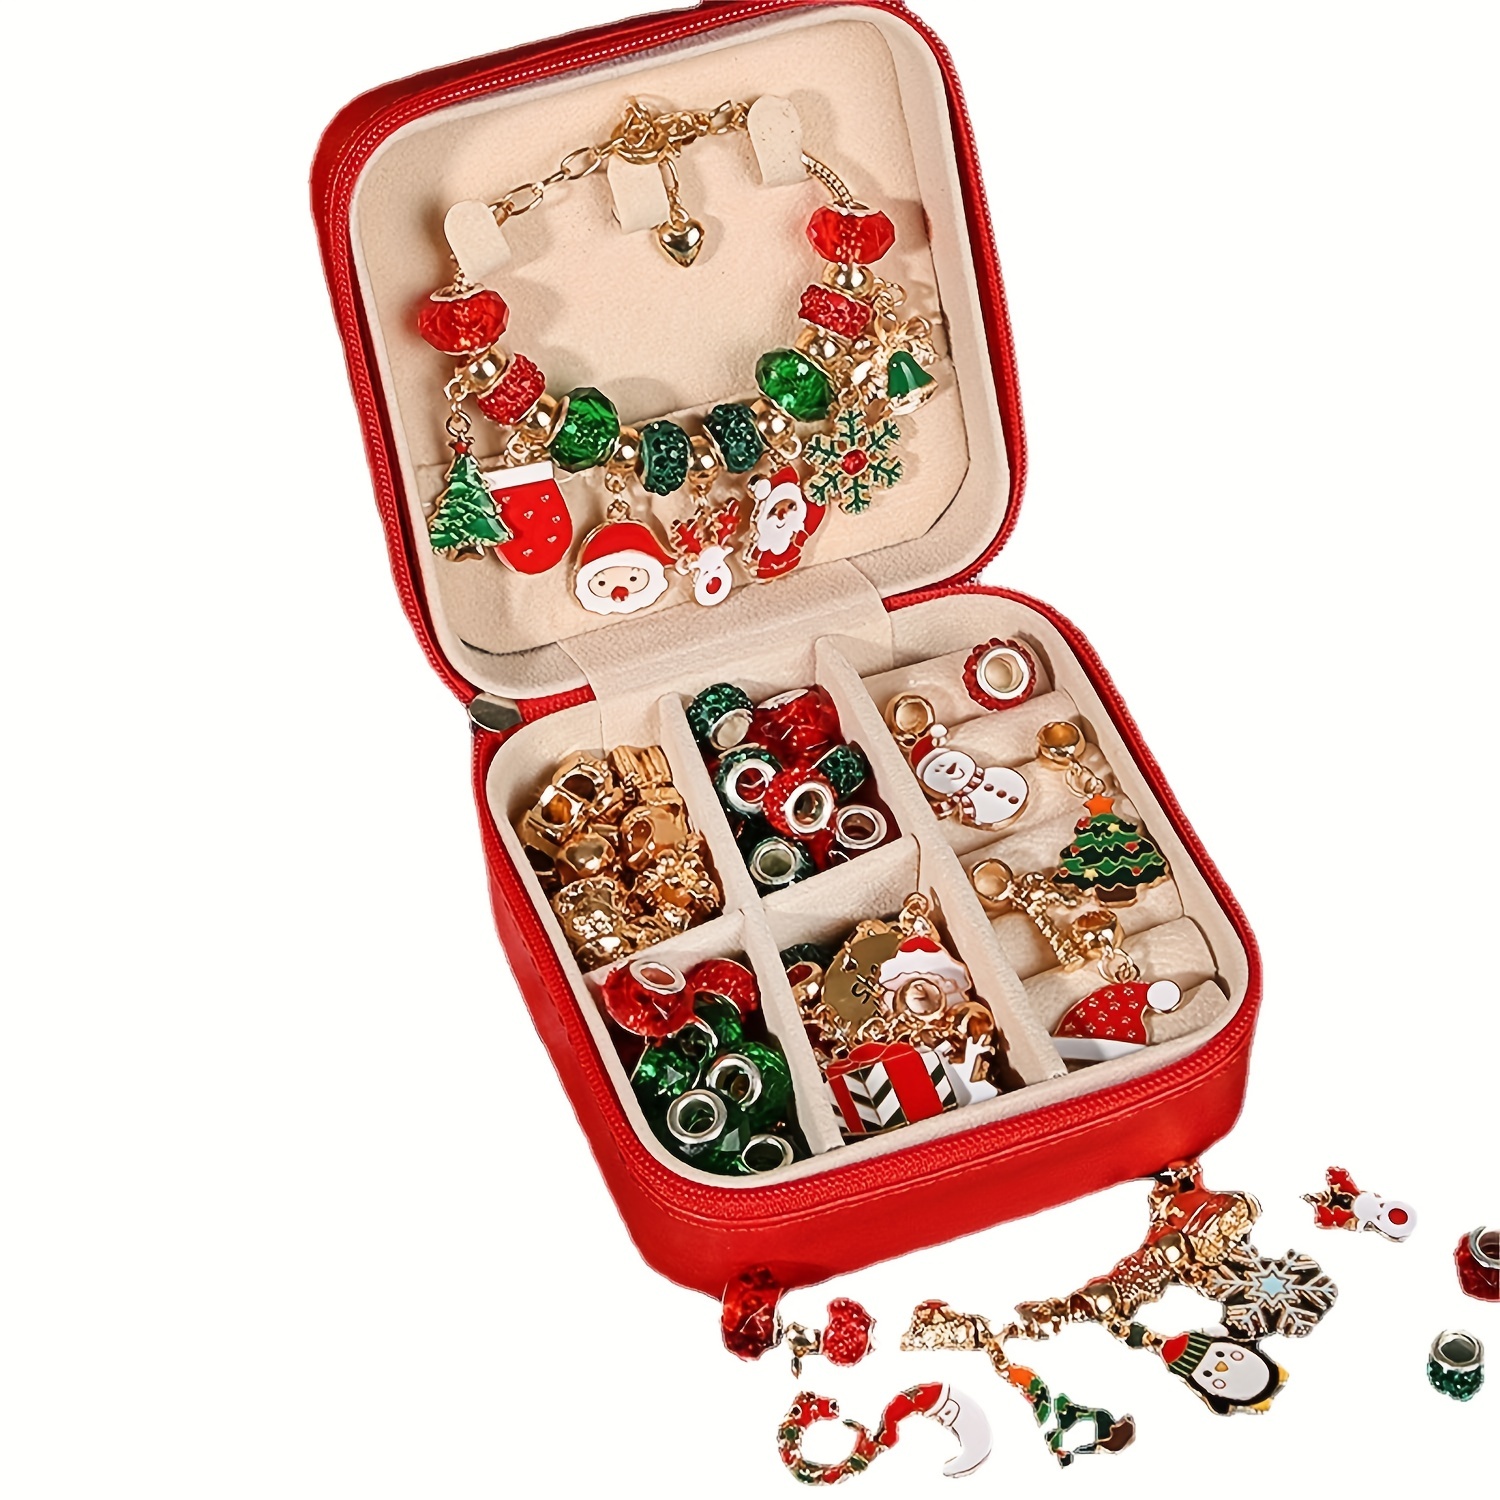 Diy Charm Bracelet Making Kit - Perfect Creative Charms Beads For